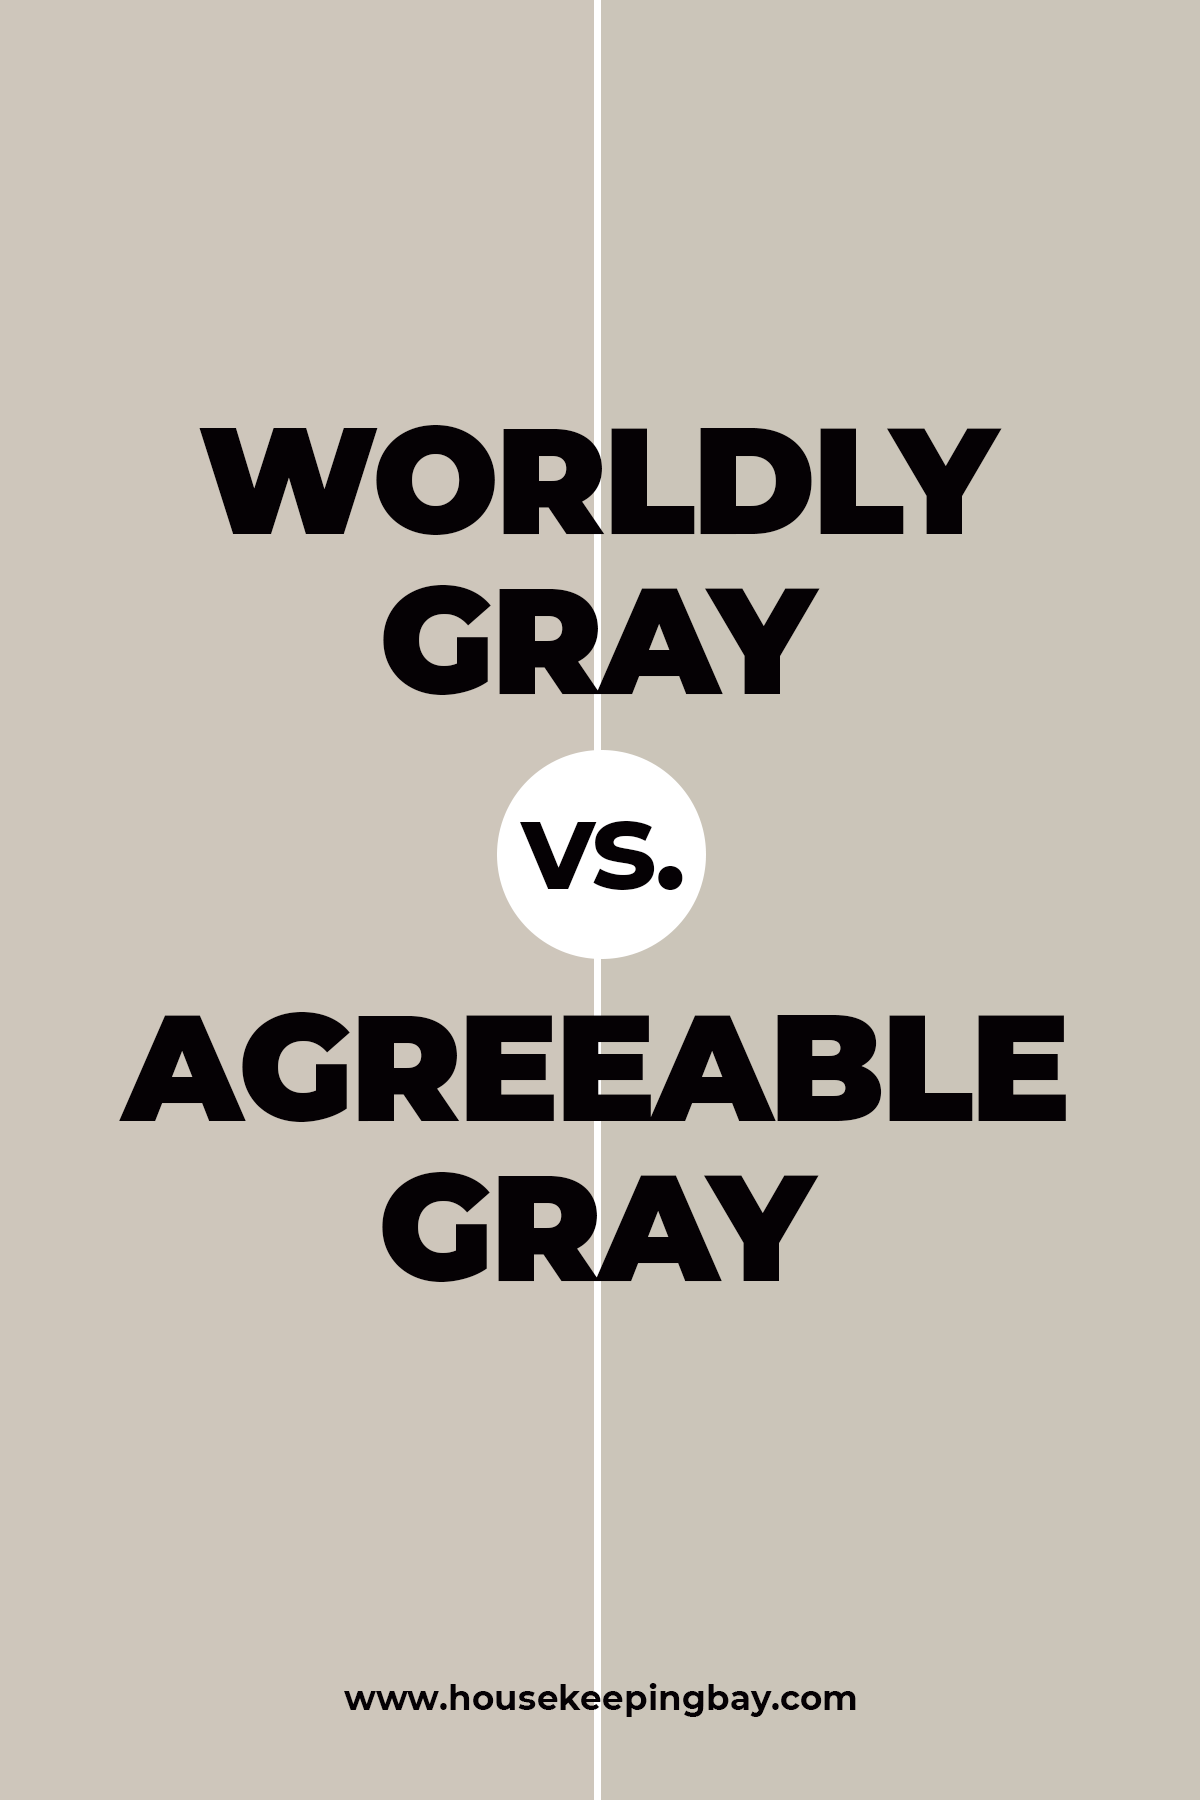 Worldly Gray vs. Agreeable Gray